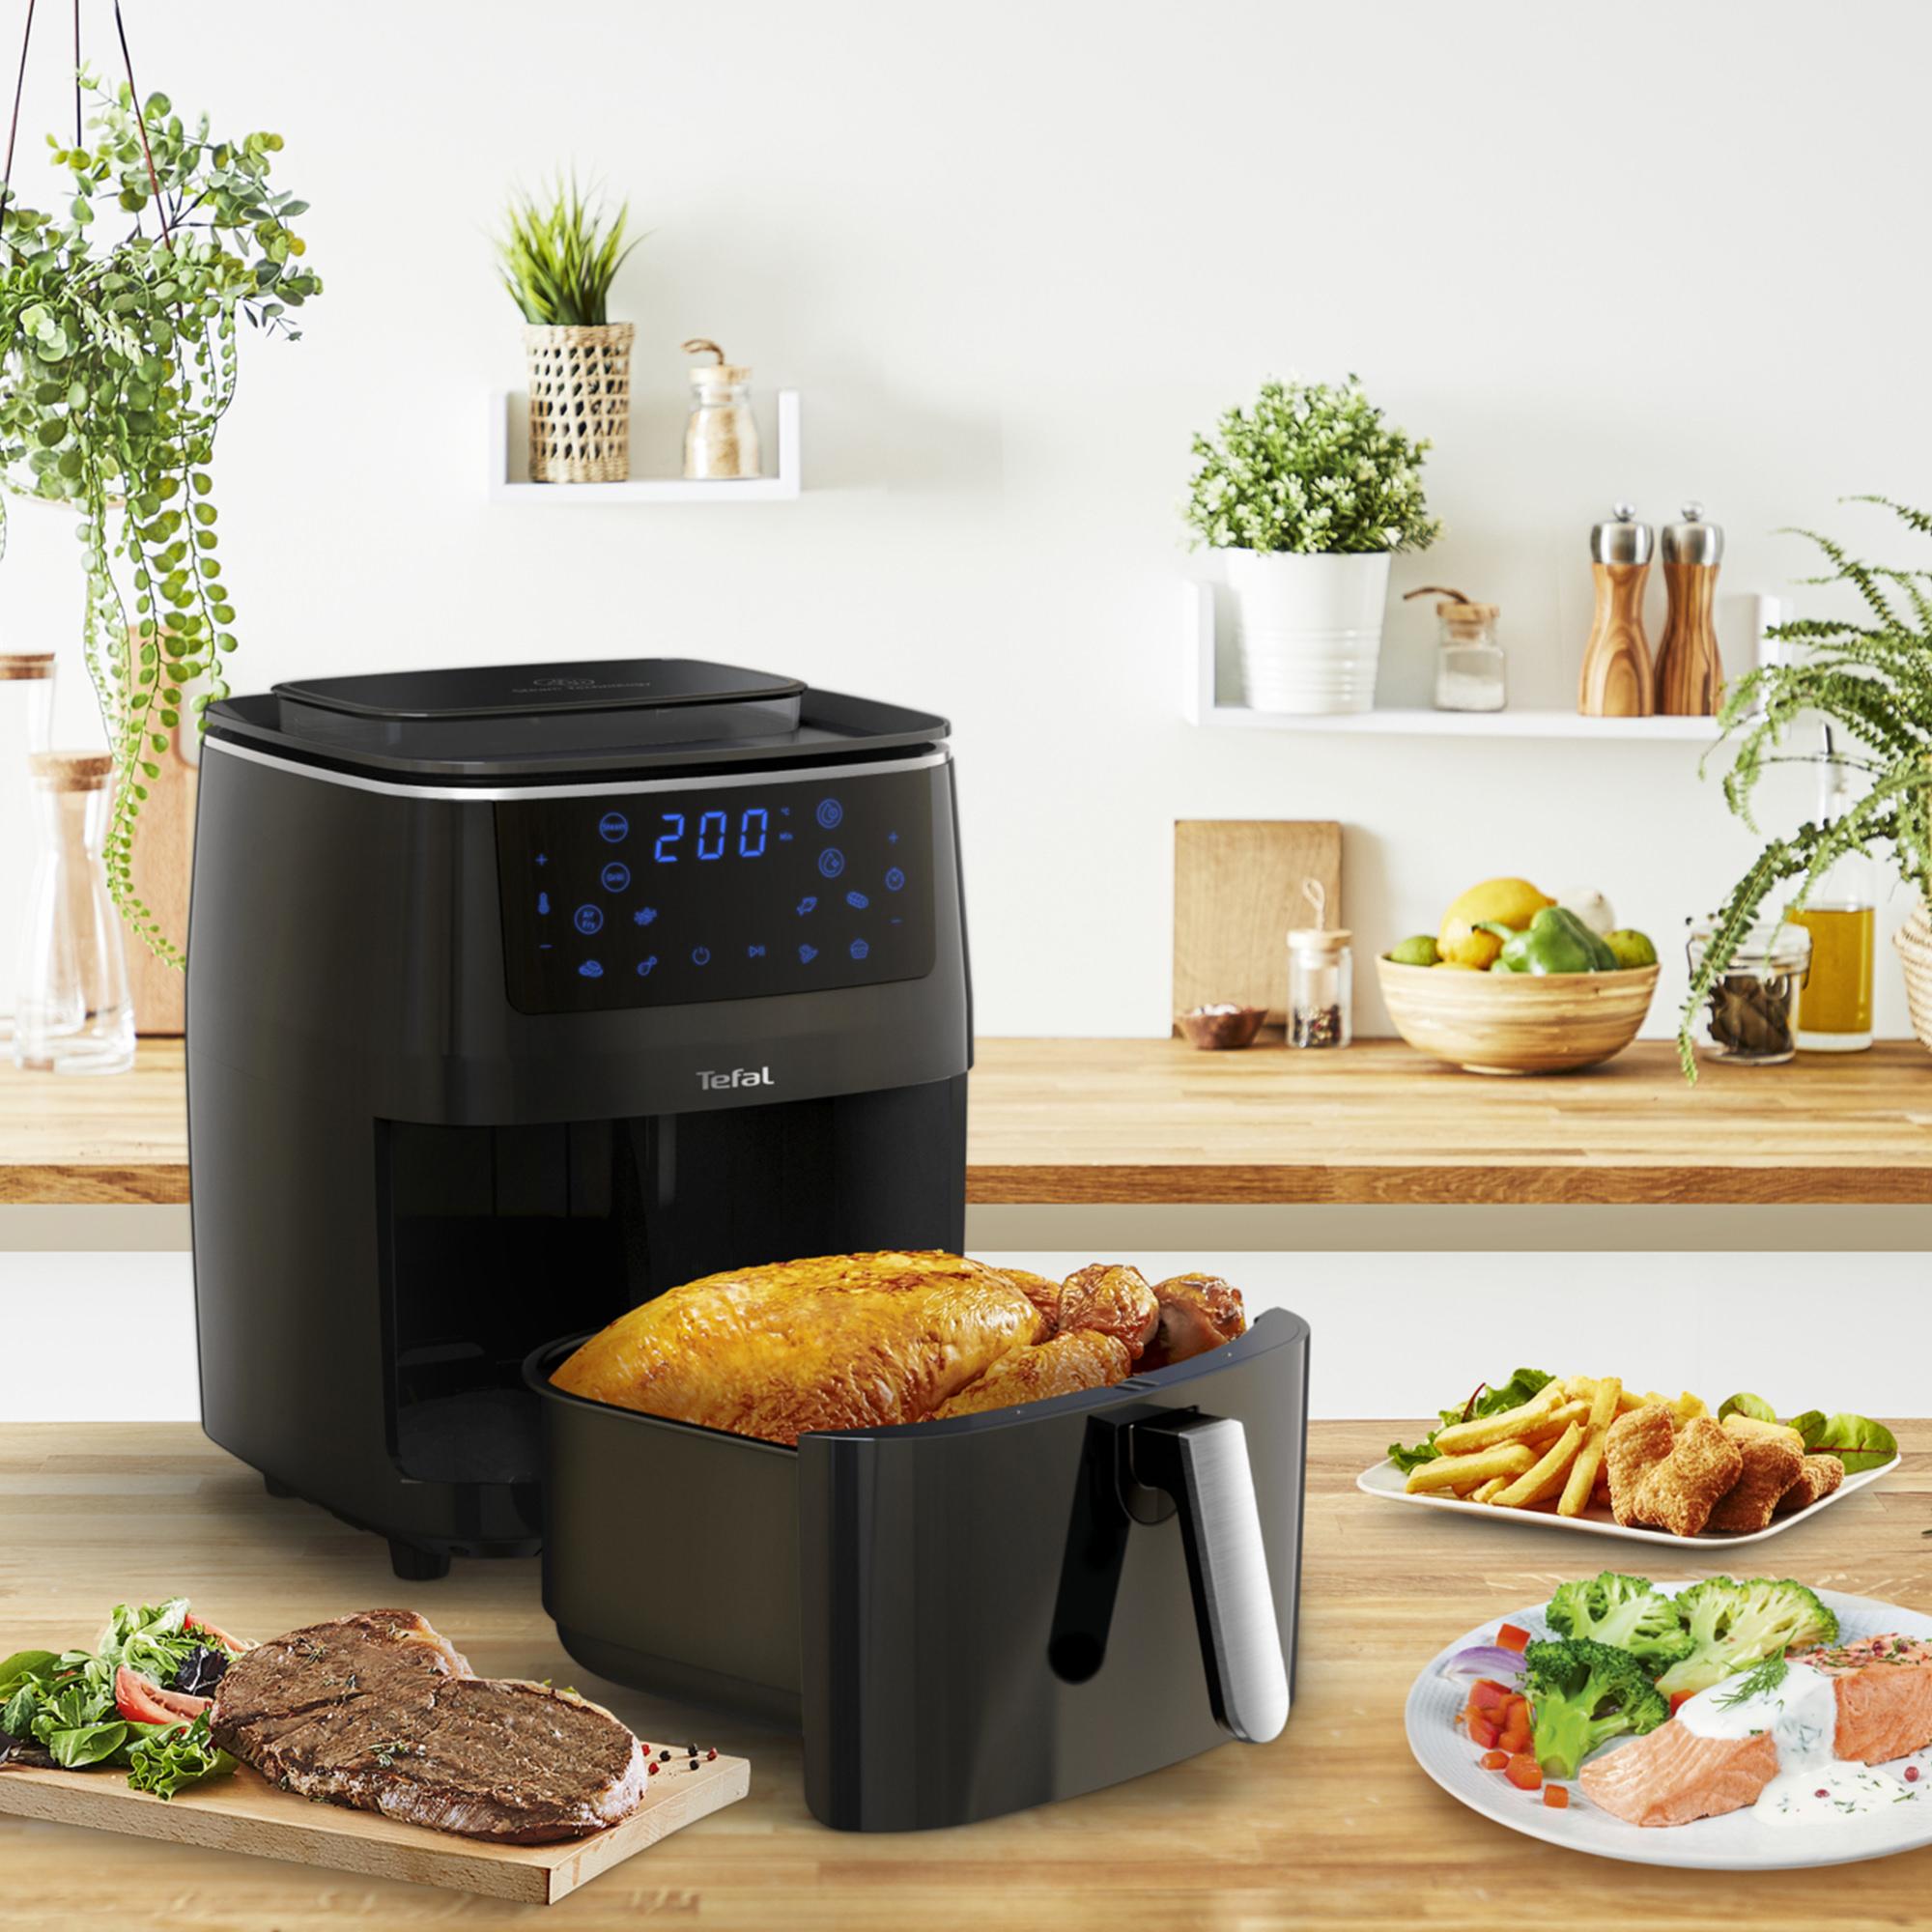 Tefal Easy Fry Grill and Steam FW2018 Air Fryer XXL 6.5L Black Image 4